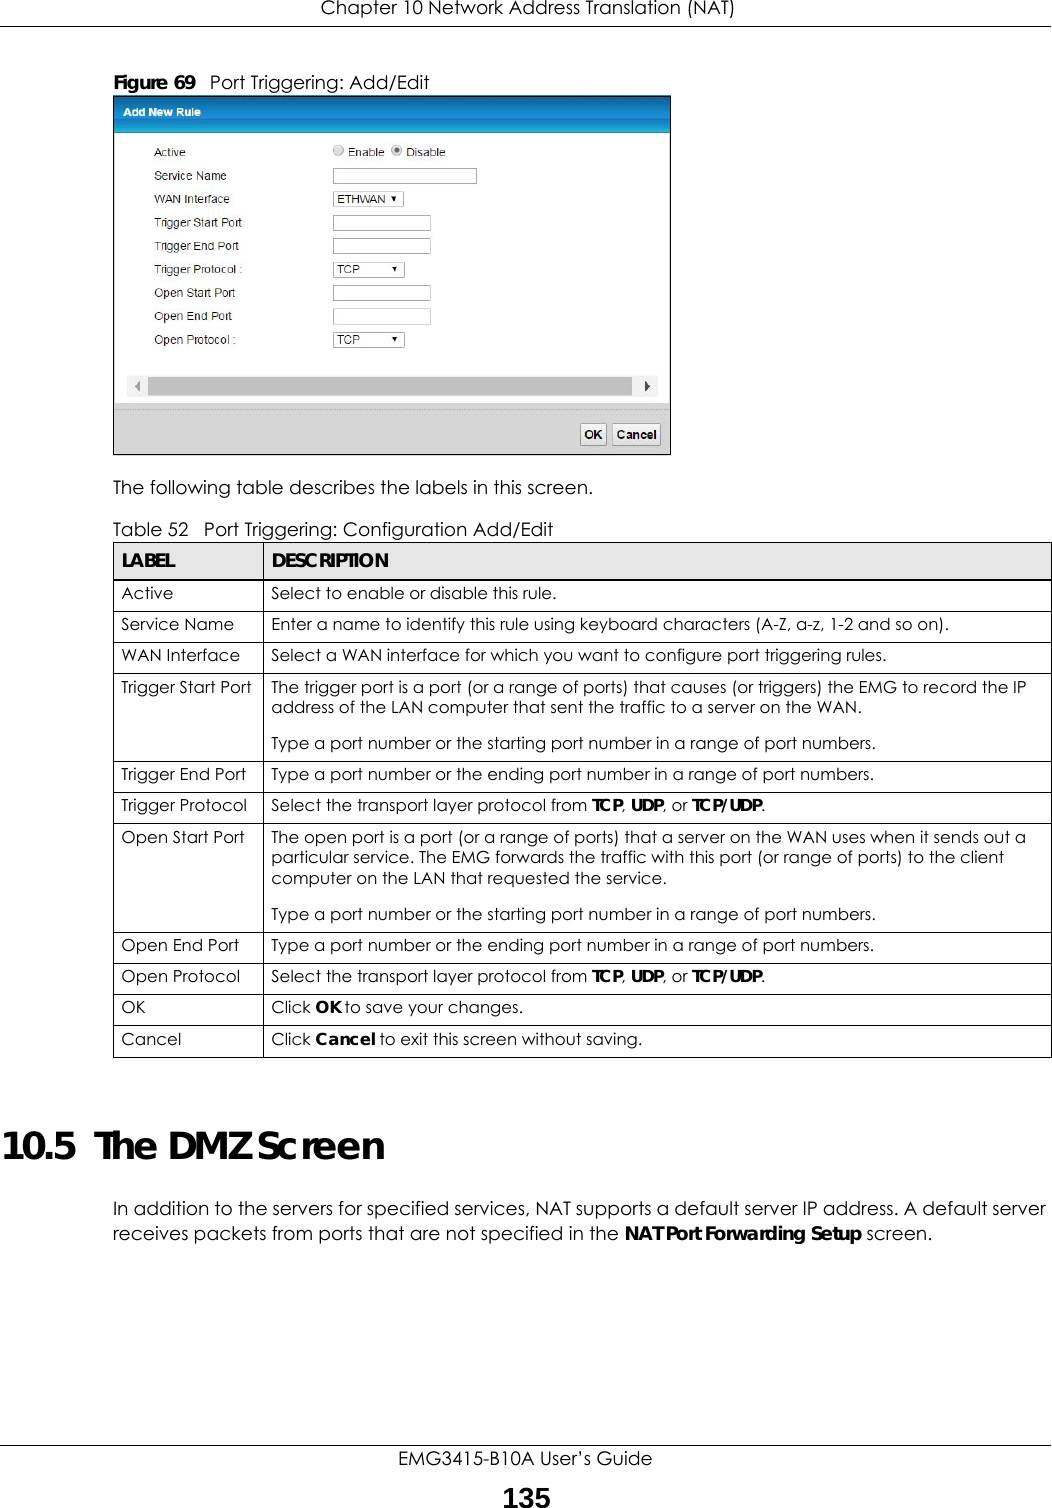  Chapter 10 Network Address Translation (NAT)EMG3415-B10A User’s Guide135Figure 69   Port Triggering: Add/Edit The following table describes the labels in this screen. 10.5  The DMZ ScreenIn addition to the servers for specified services, NAT supports a default server IP address. A default server receives packets from ports that are not specified in the NAT Port Forwarding Setup screen.Table 52   Port Triggering: Configuration Add/EditLABEL DESCRIPTIONActive Select to enable or disable this rule.Service Name Enter a name to identify this rule using keyboard characters (A-Z, a-z, 1-2 and so on). WAN Interface Select a WAN interface for which you want to configure port triggering rules.Trigger Start Port The trigger port is a port (or a range of ports) that causes (or triggers) the EMG to record the IP address of the LAN computer that sent the traffic to a server on the WAN.Type a port number or the starting port number in a range of port numbers.Trigger End Port  Type a port number or the ending port number in a range of port numbers.Trigger Protocol Select the transport layer protocol from TCP, UDP, or TCP/UDP.Open Start Port The open port is a port (or a range of ports) that a server on the WAN uses when it sends out a particular service. The EMG forwards the traffic with this port (or range of ports) to the client computer on the LAN that requested the service. Type a port number or the starting port number in a range of port numbers.Open End Port  Type a port number or the ending port number in a range of port numbers.Open Protocol Select the transport layer protocol from TCP, UDP, or TCP/UDP.OK Click OK to save your changes.Cancel Click Cancel to exit this screen without saving.